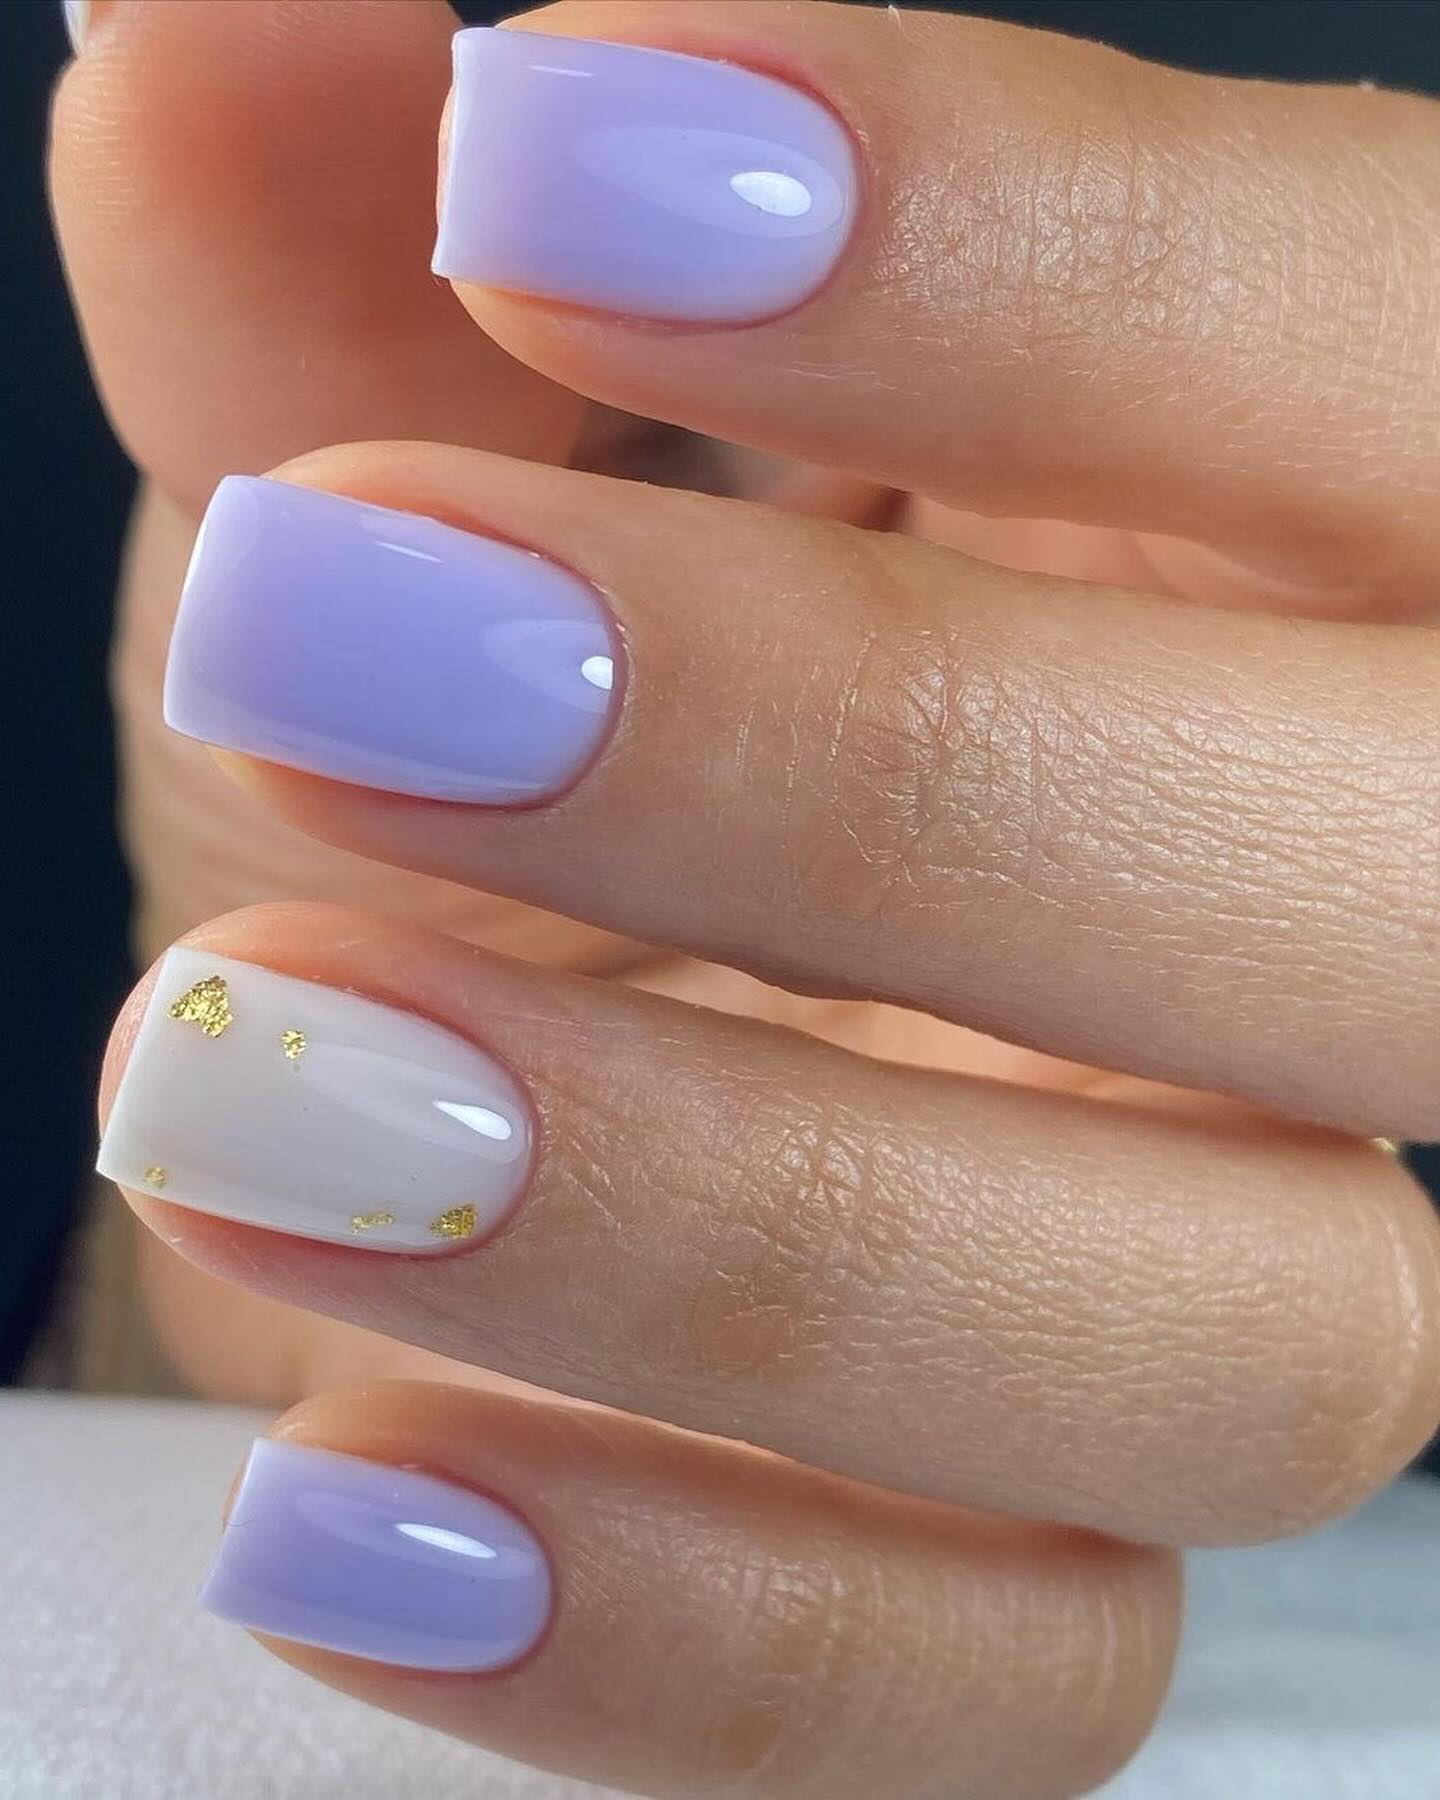 100 Pretty Spring Nail Designs To Try This Year images 48